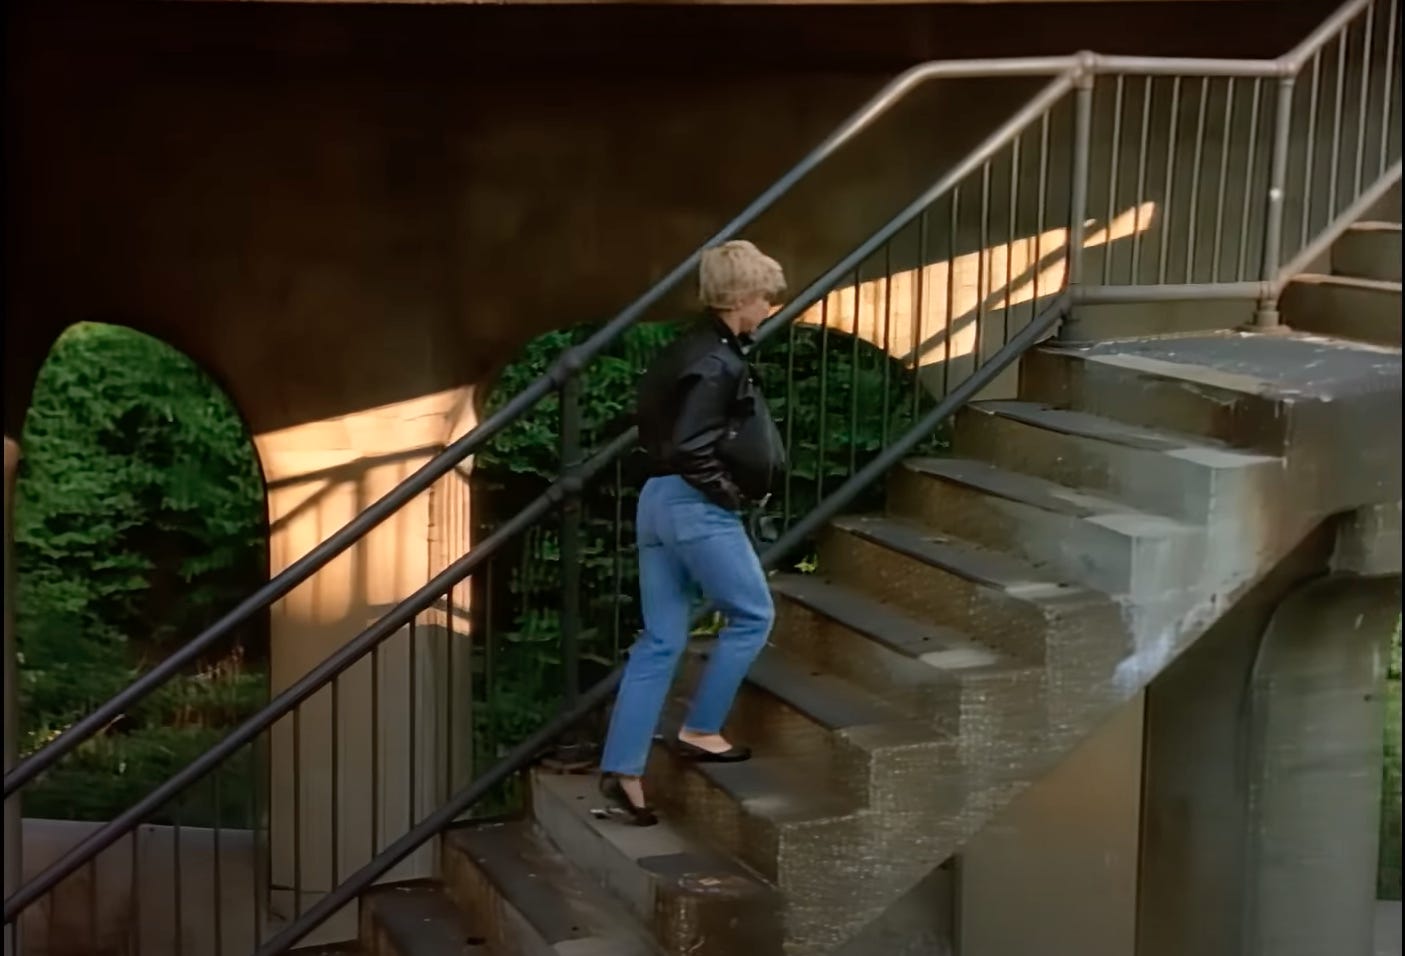 Screenshot from Madonna's Papa Don't Preach video showing Madge walking up some stairs